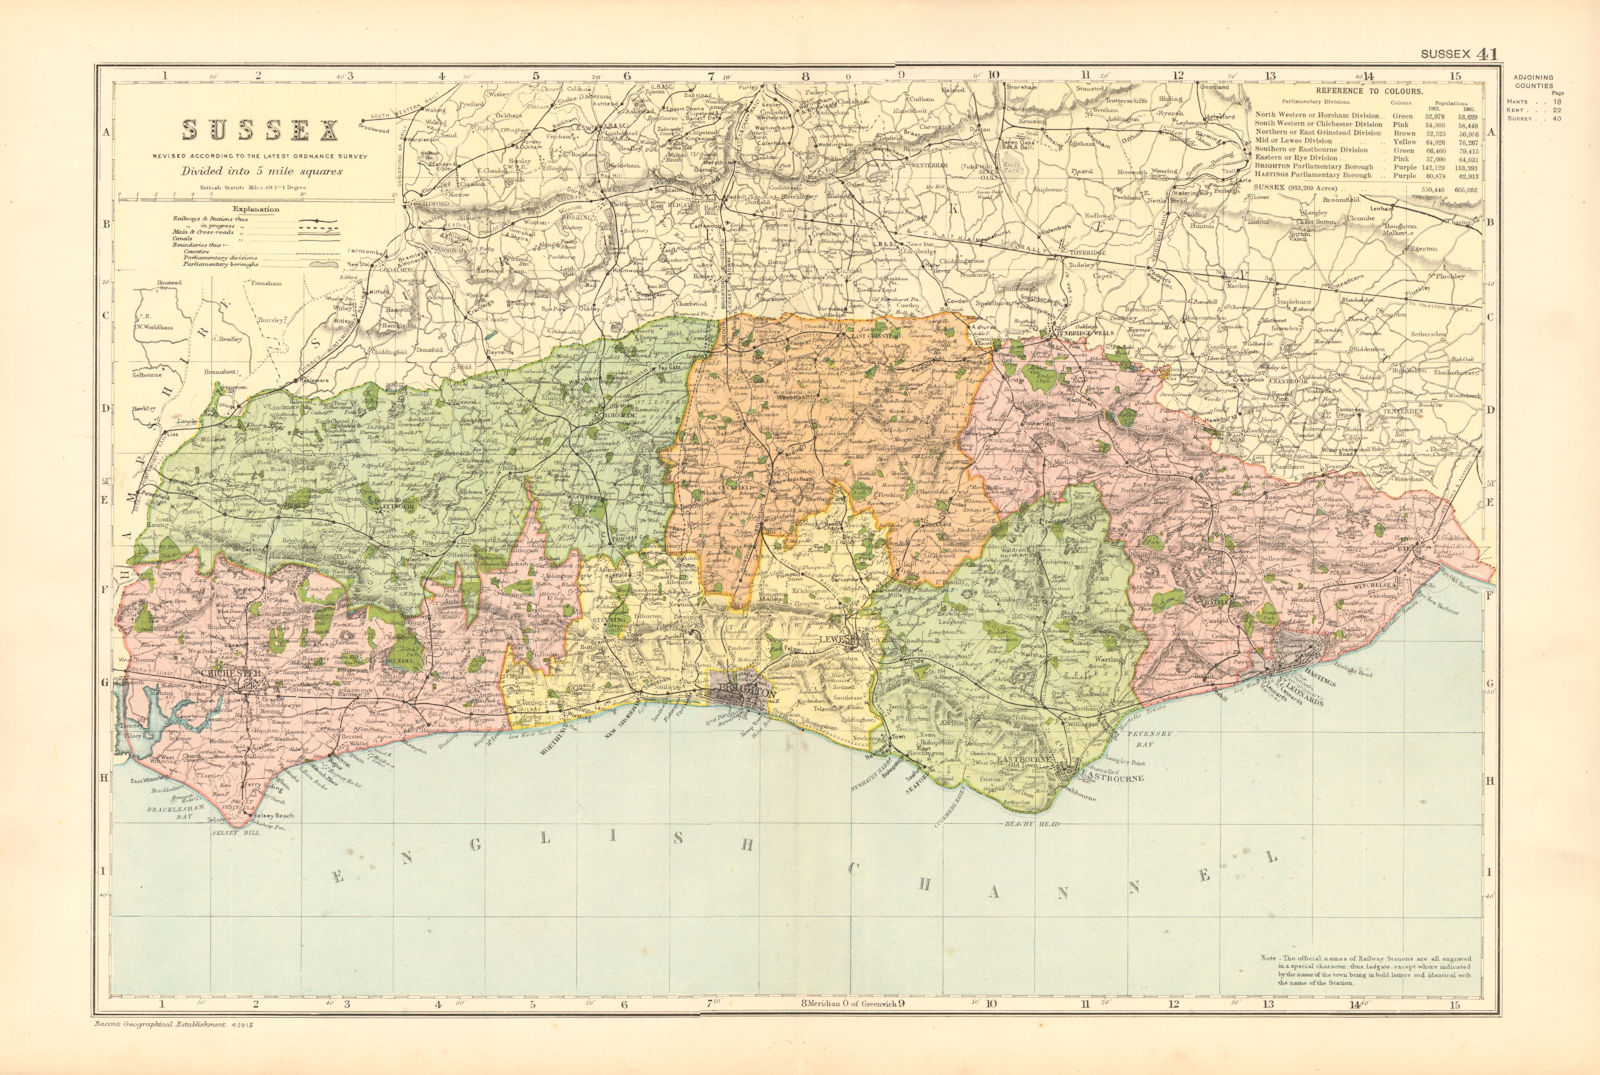 SUSSEX. Showing Parliamentary divisions, boroughs & parks. BACON 1904 old map